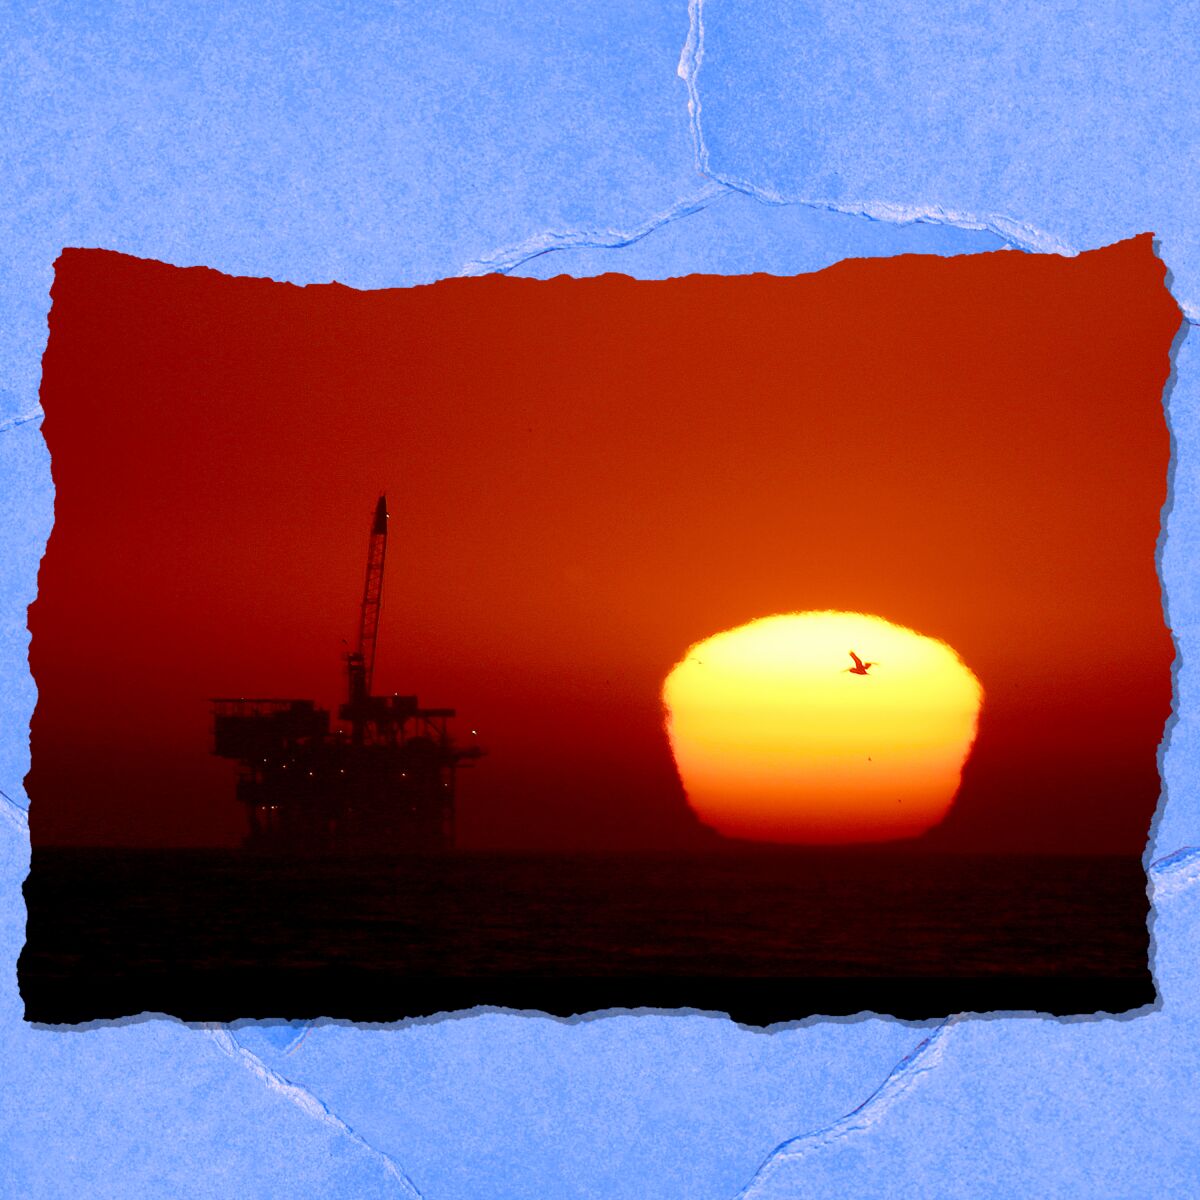 An oil rig is seen against a red sky as the sun sets.